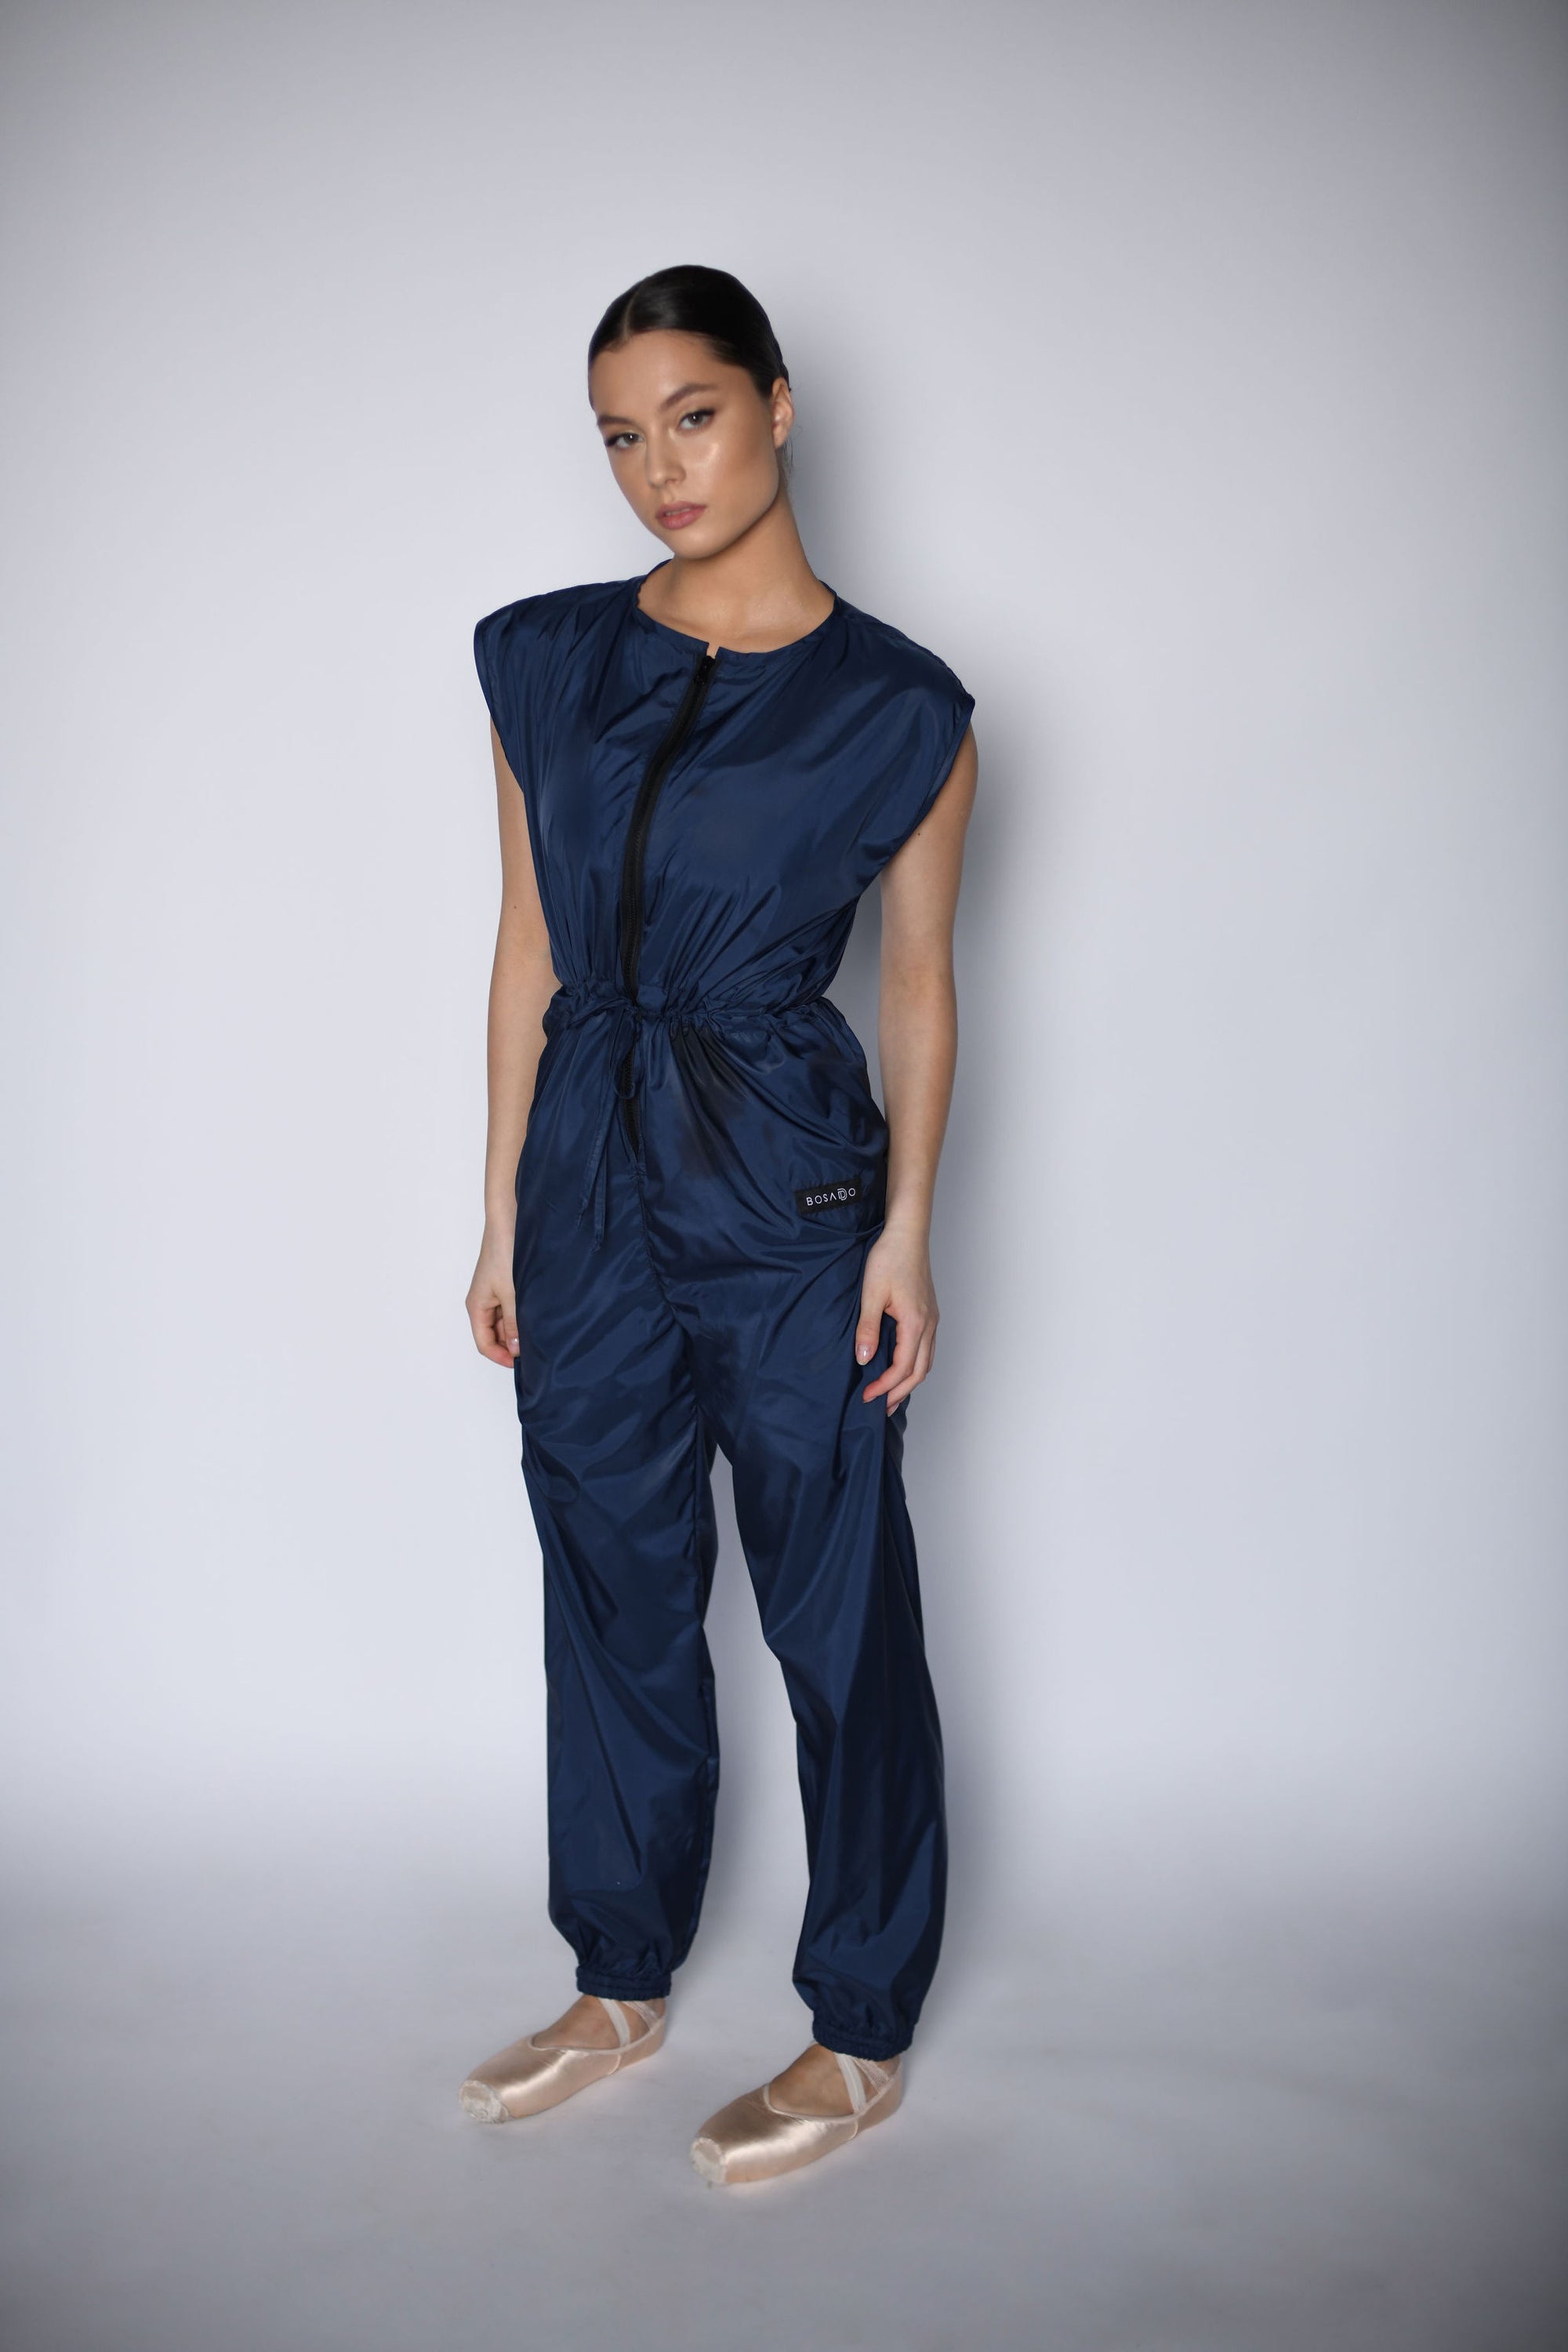 NEW URBAN SWAN COLLECTION S/S 23 | Royal blue jumpsuit